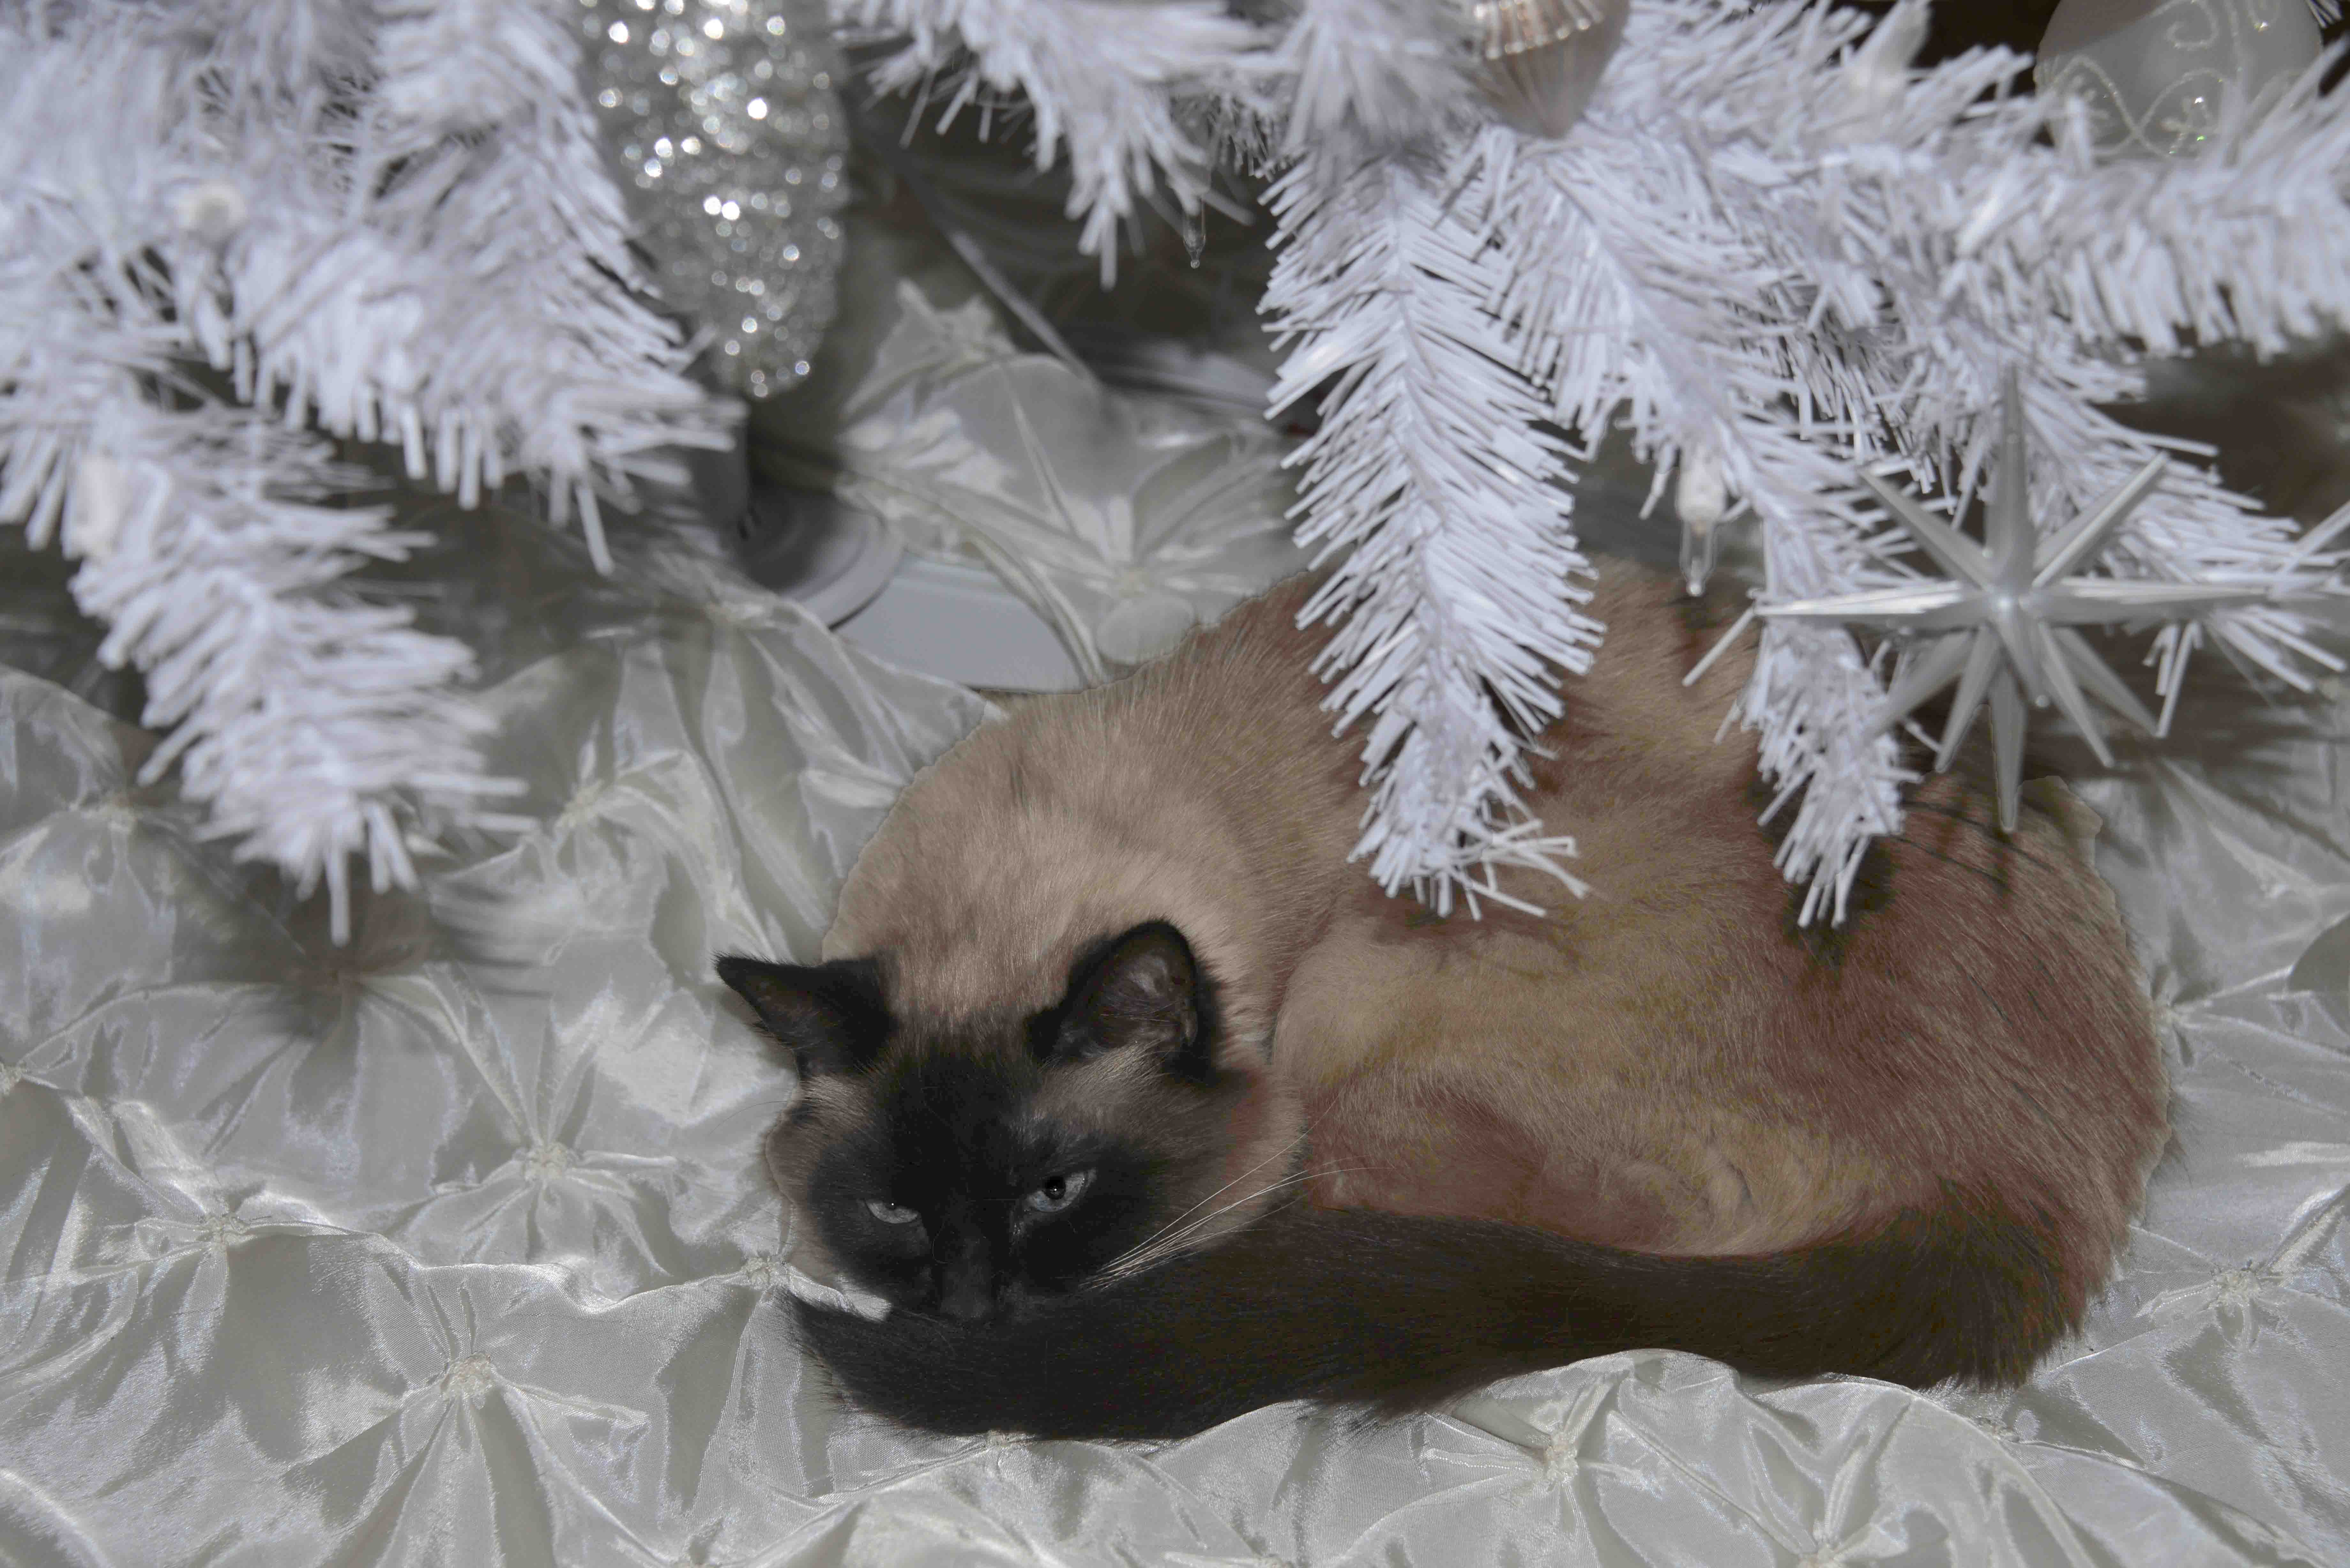 Due to health issues, we lost our 19 year-old cat in September.  Going through some photographs of Koko, we found a picture of her resting under our Christmas tree.  Her picture, taken a few years ago under the tree, made for a very warm, but sad, Holiday Memory.